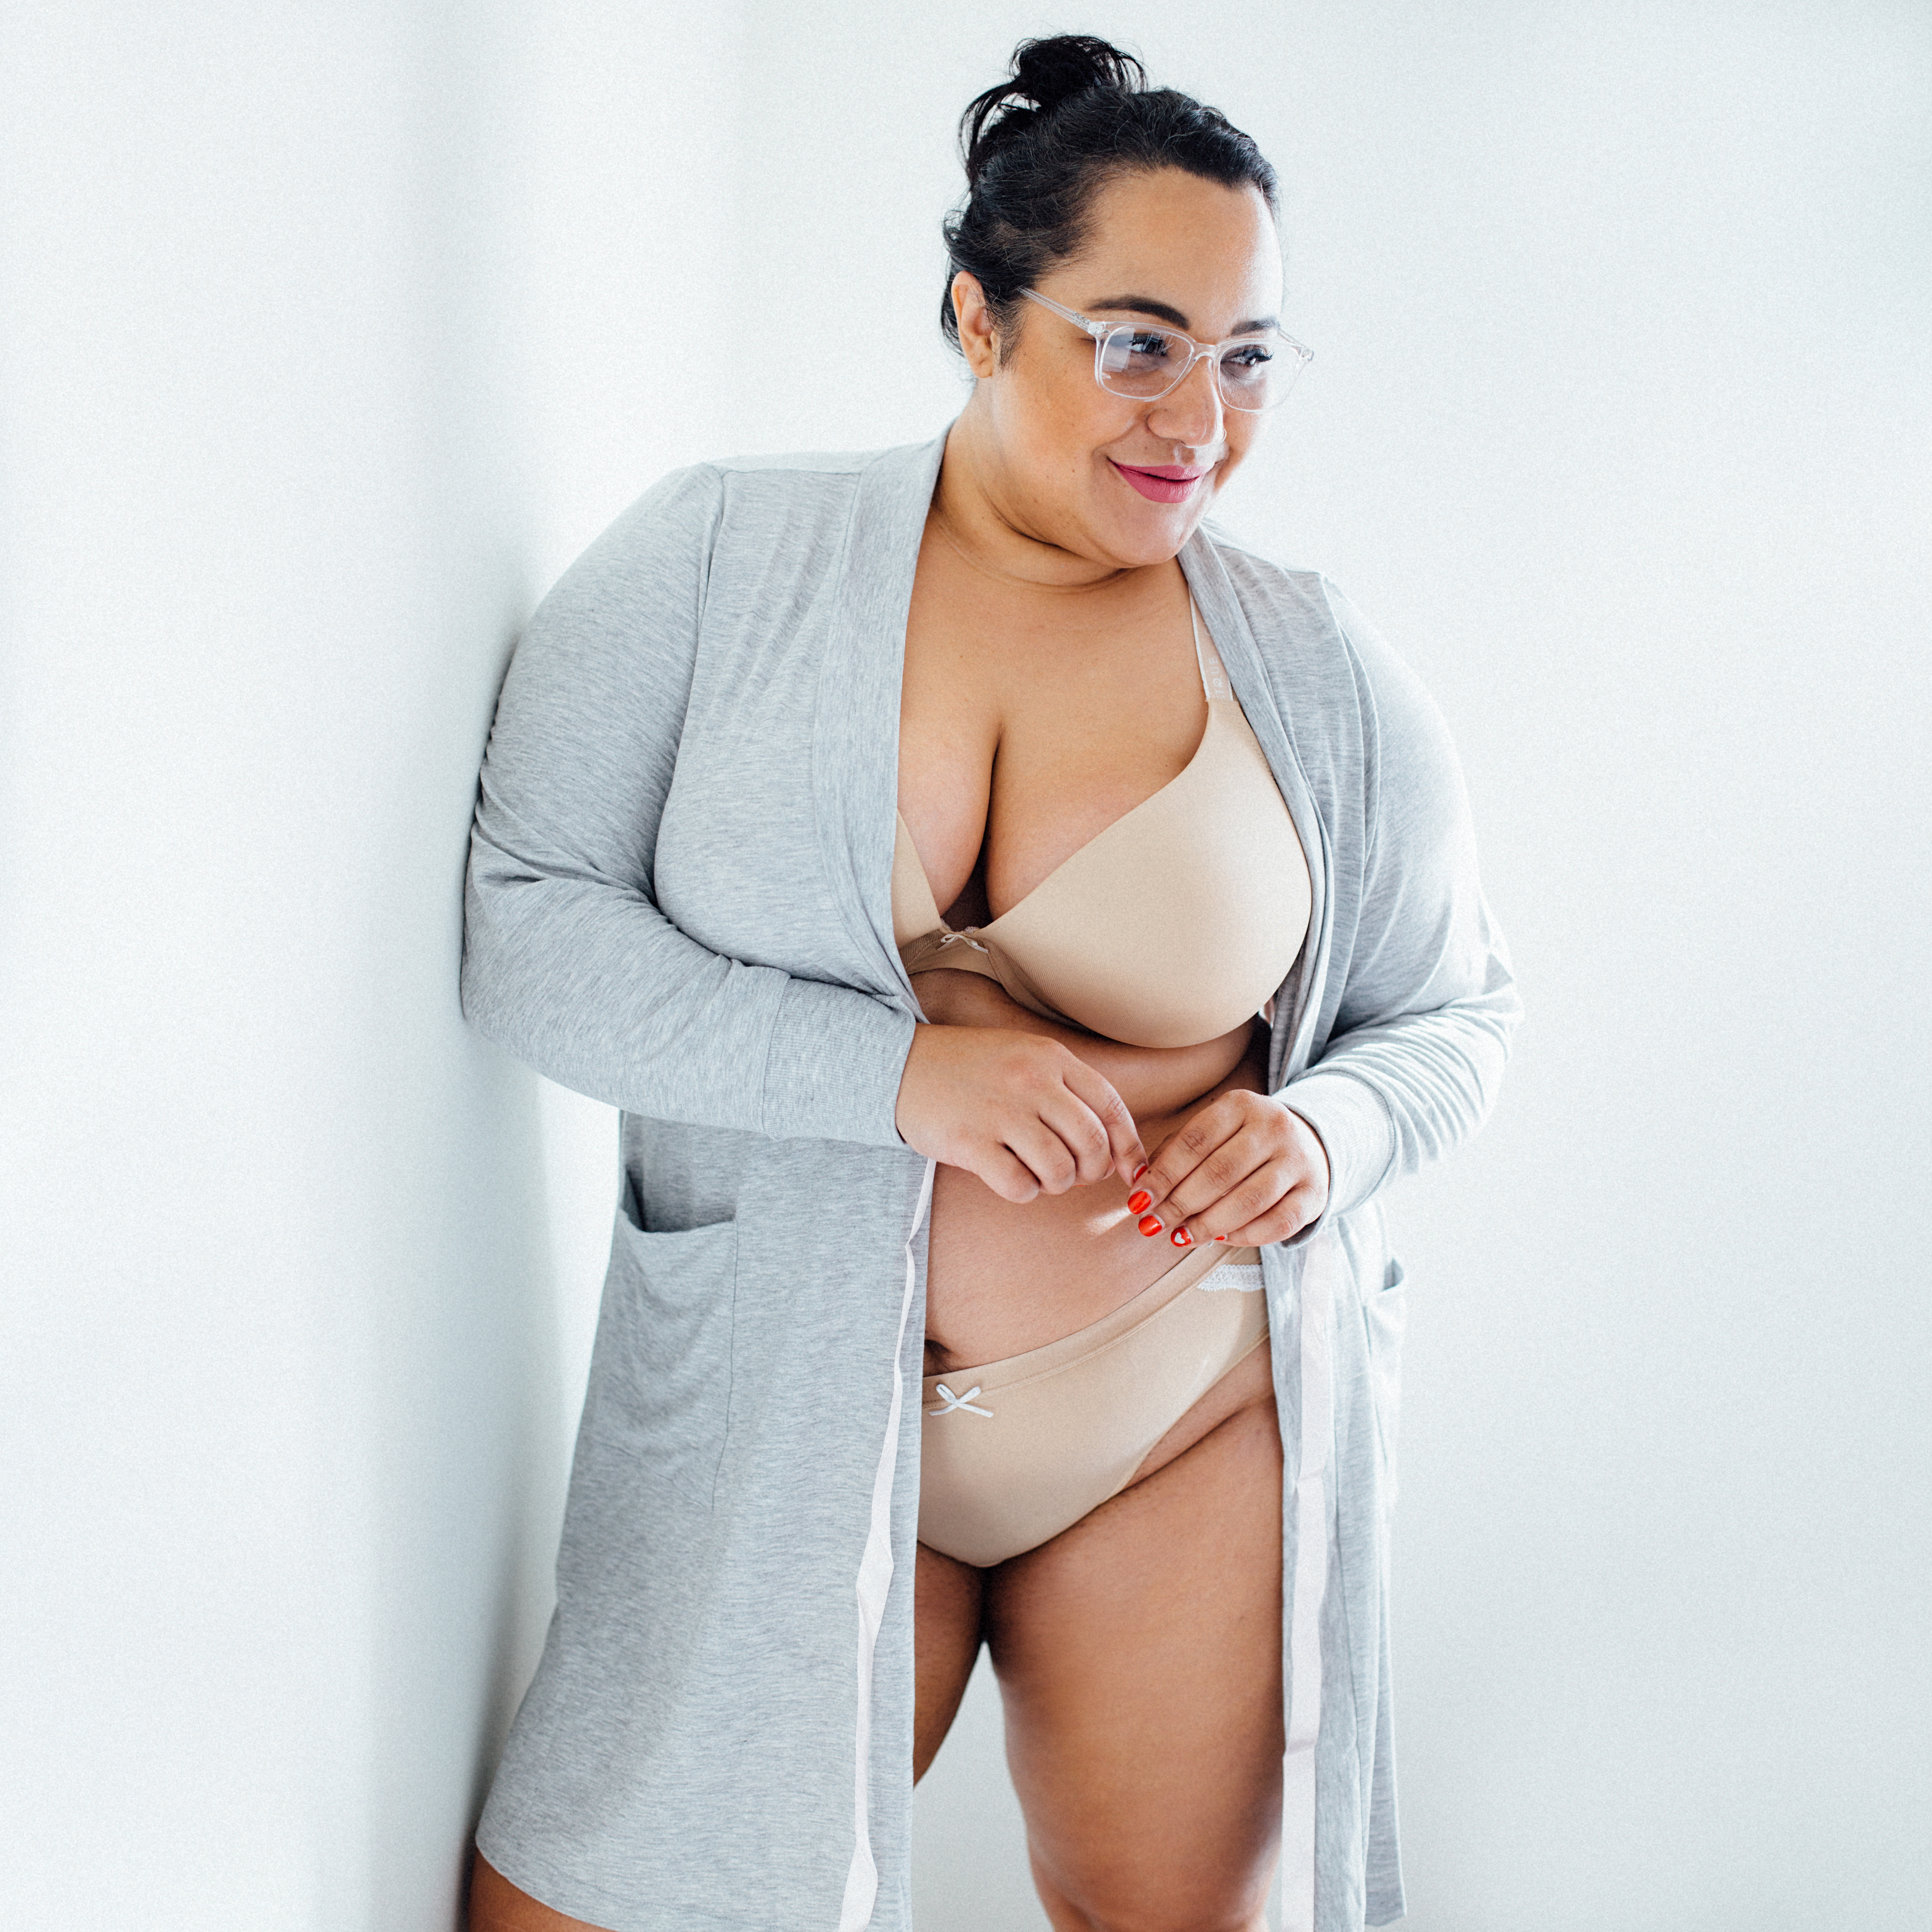 The Chief of Style in Lane Bryant Cacique So Light Soft Plunge Plus Size Bra, Panties, and Bathrobe